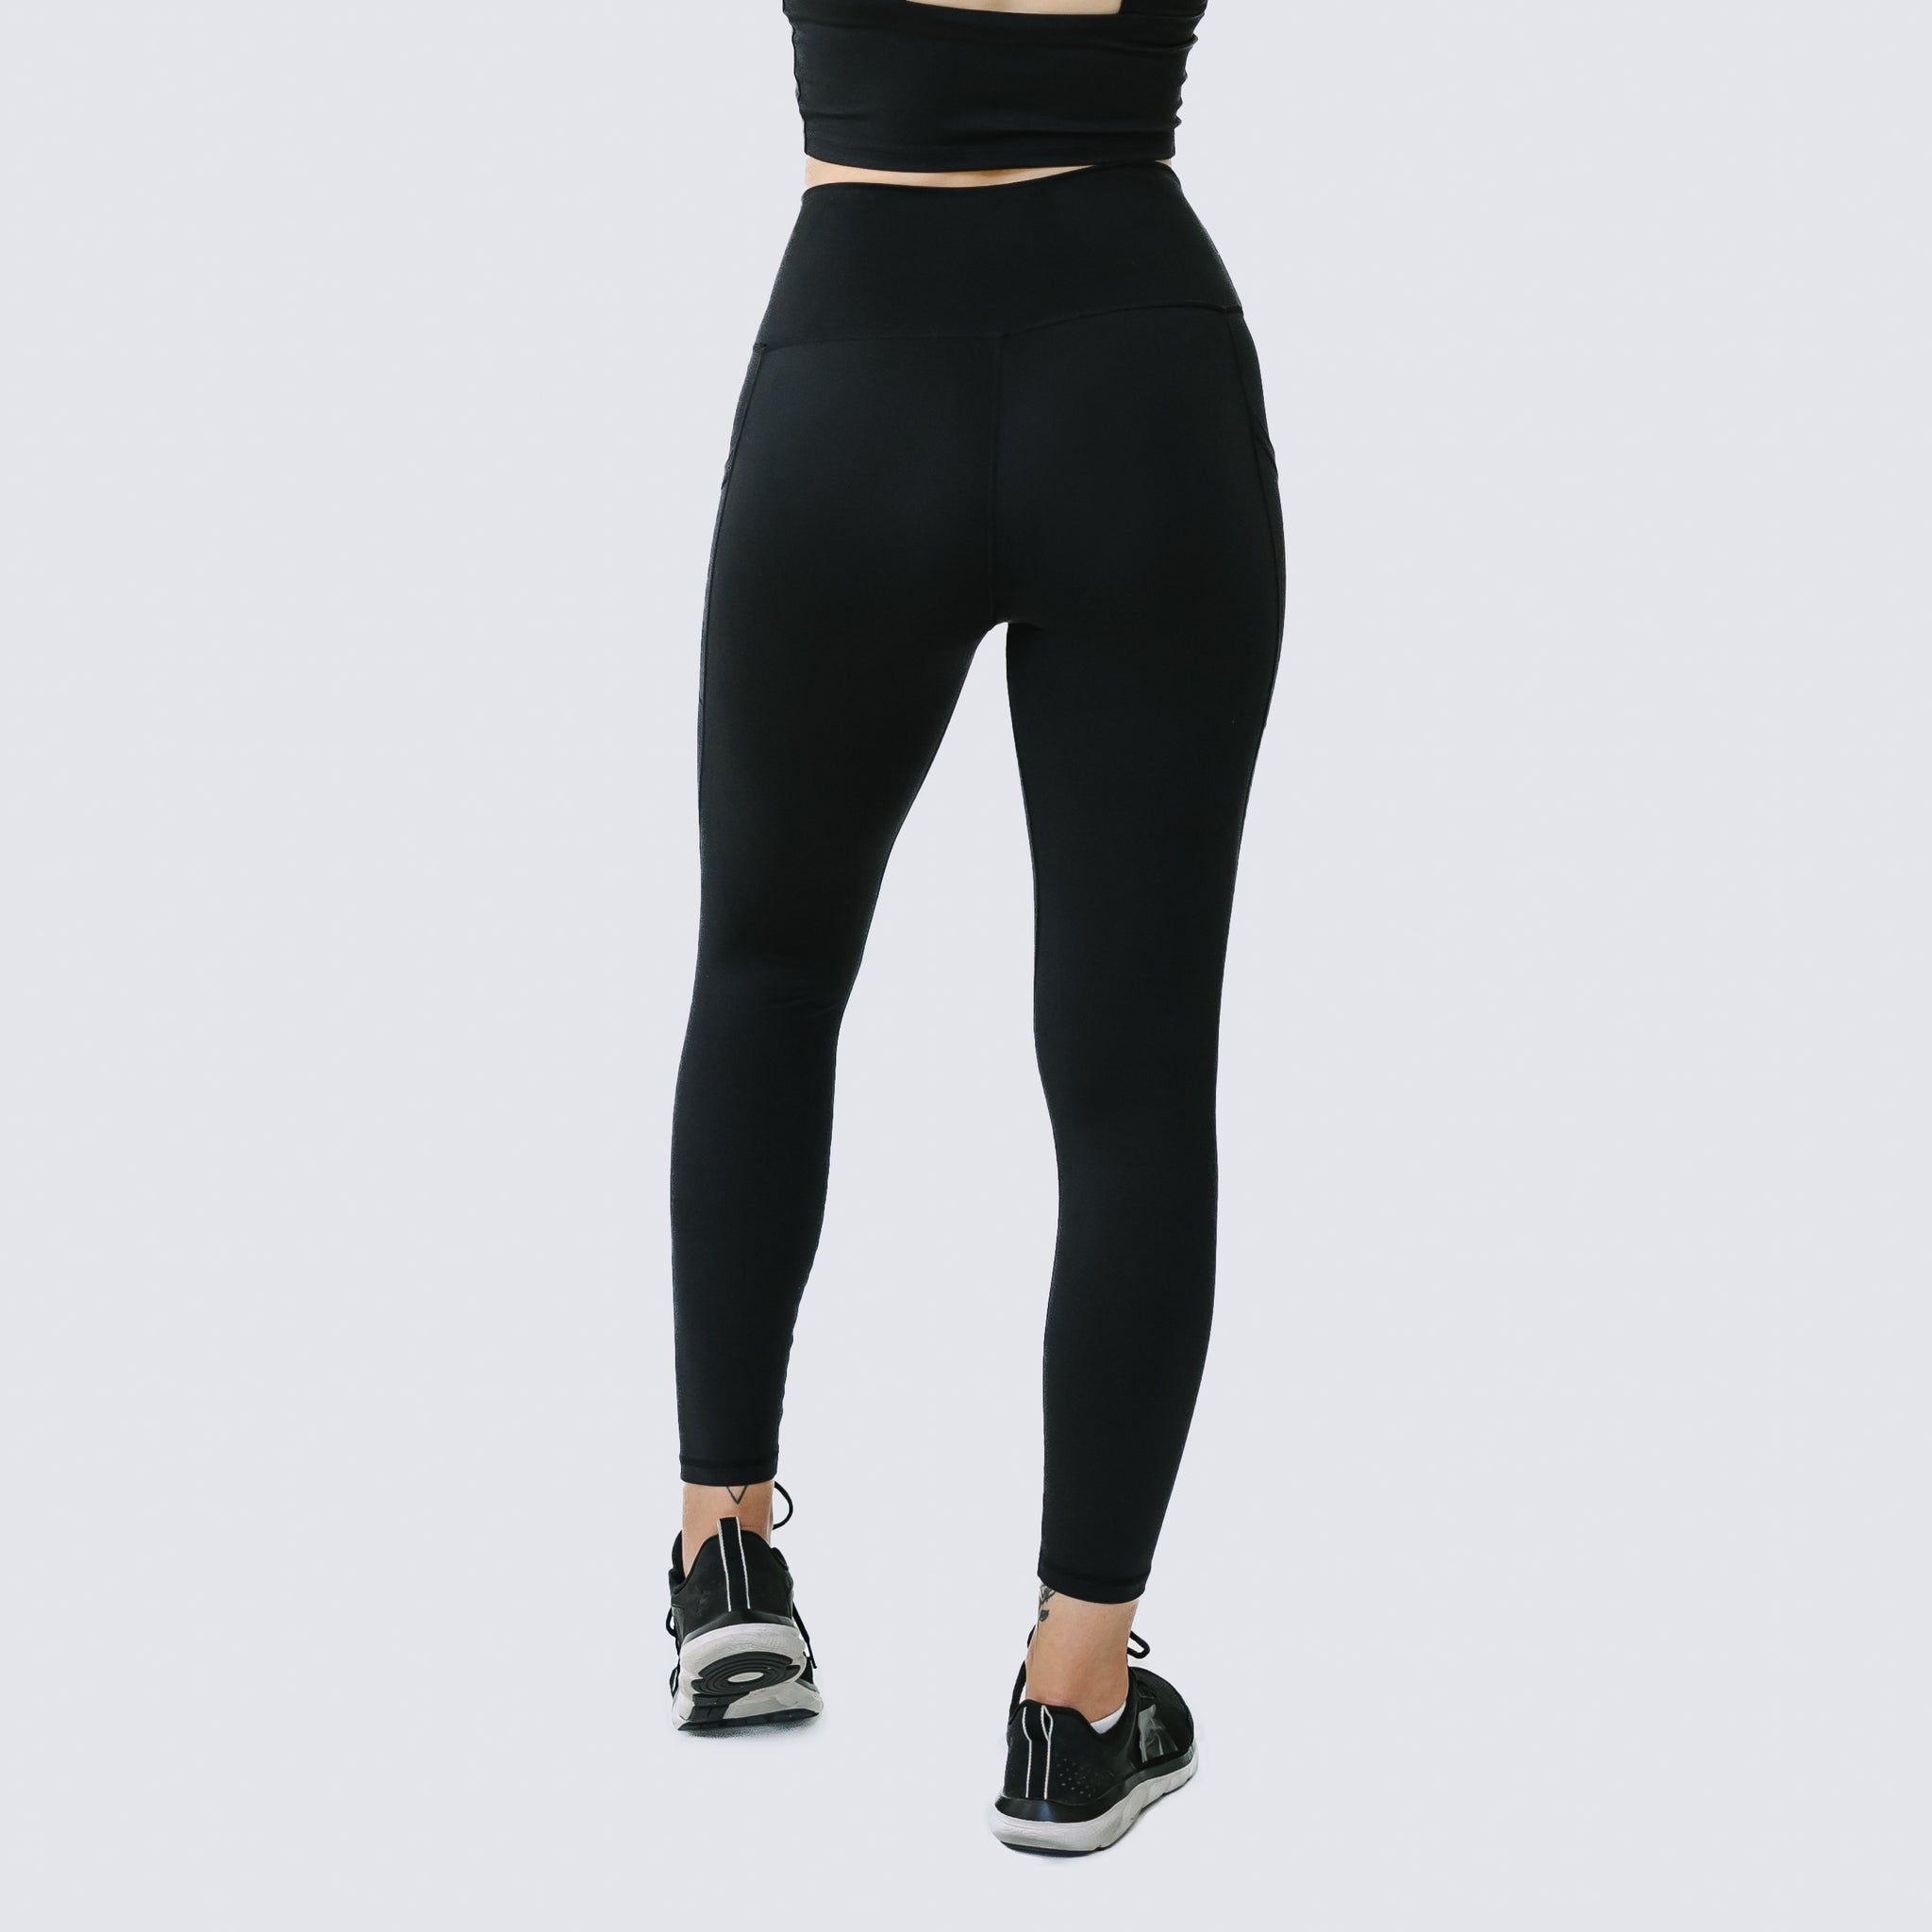 Love Stay – Leggings Put Black Fit - Solid SoftLuxe and